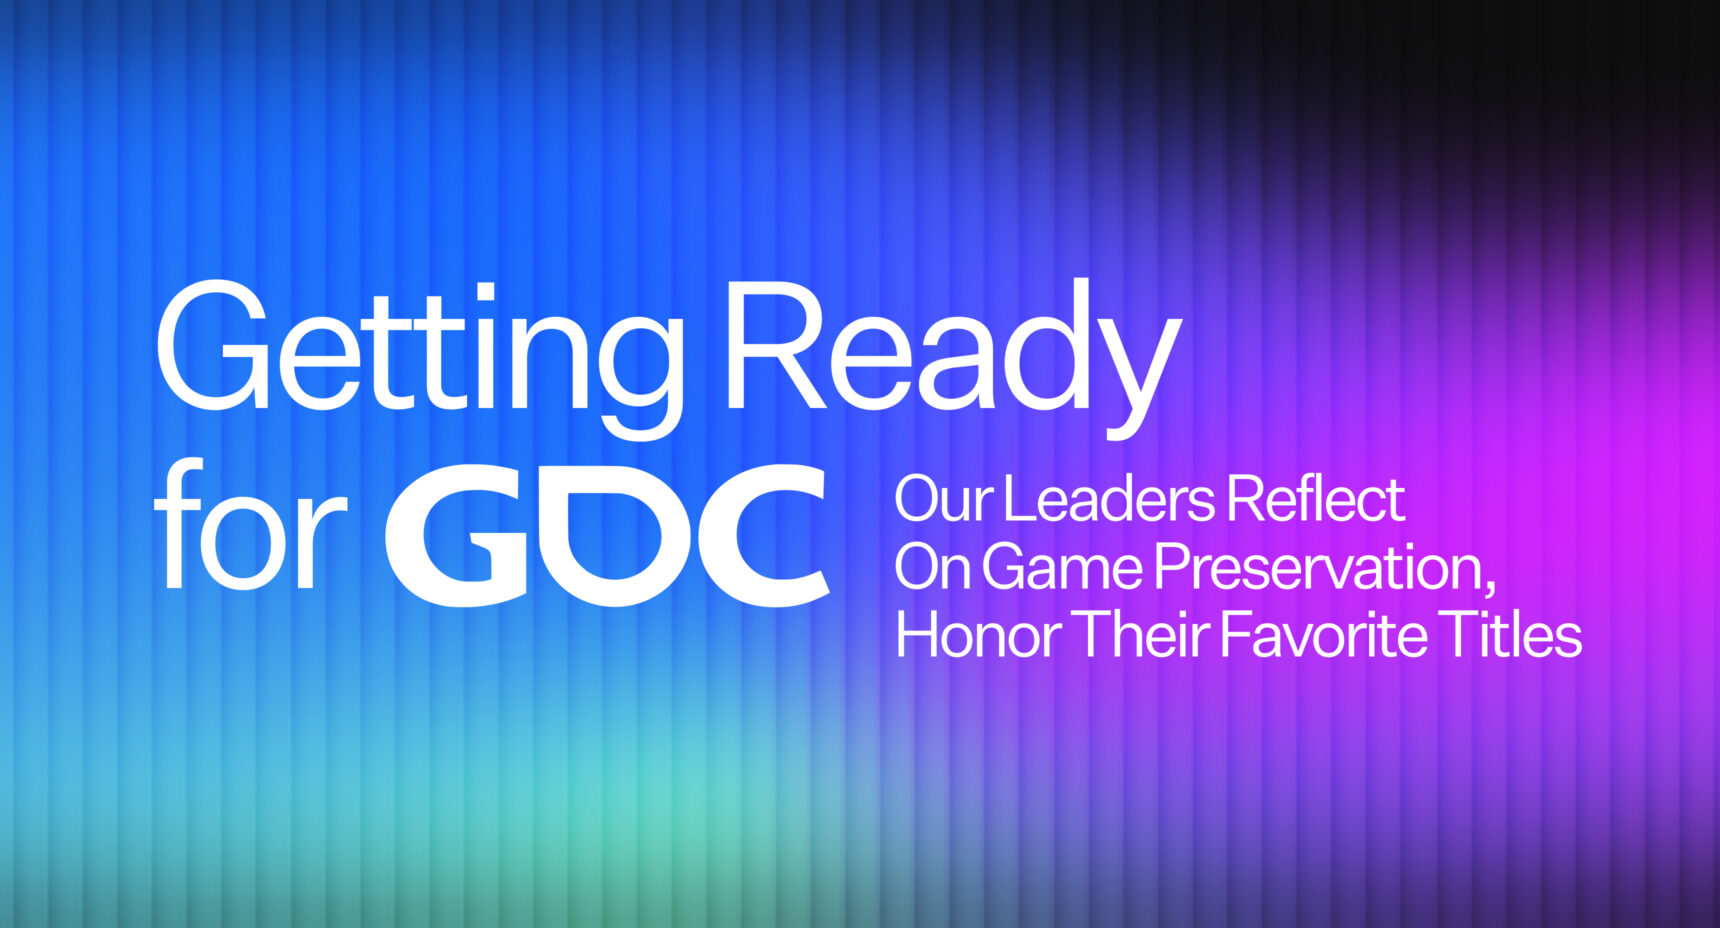 Getting Ready for GDC: Our Leaders Reflect On Game Preservation, Honor Their Favorite Titles